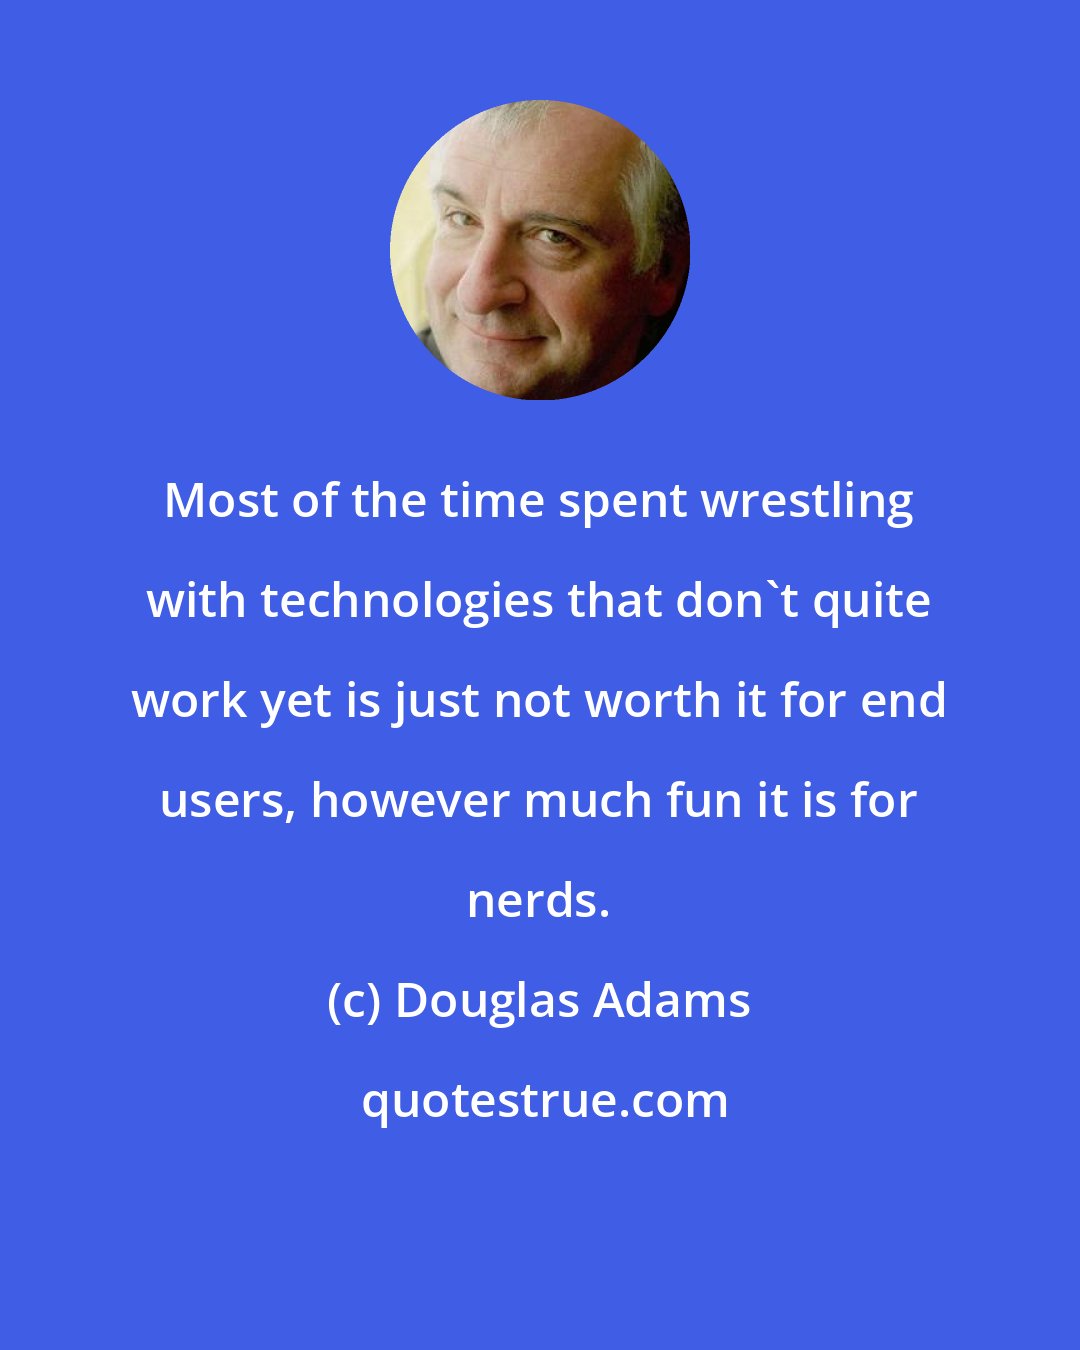 Douglas Adams: Most of the time spent wrestling with technologies that don't quite work yet is just not worth it for end users, however much fun it is for nerds.